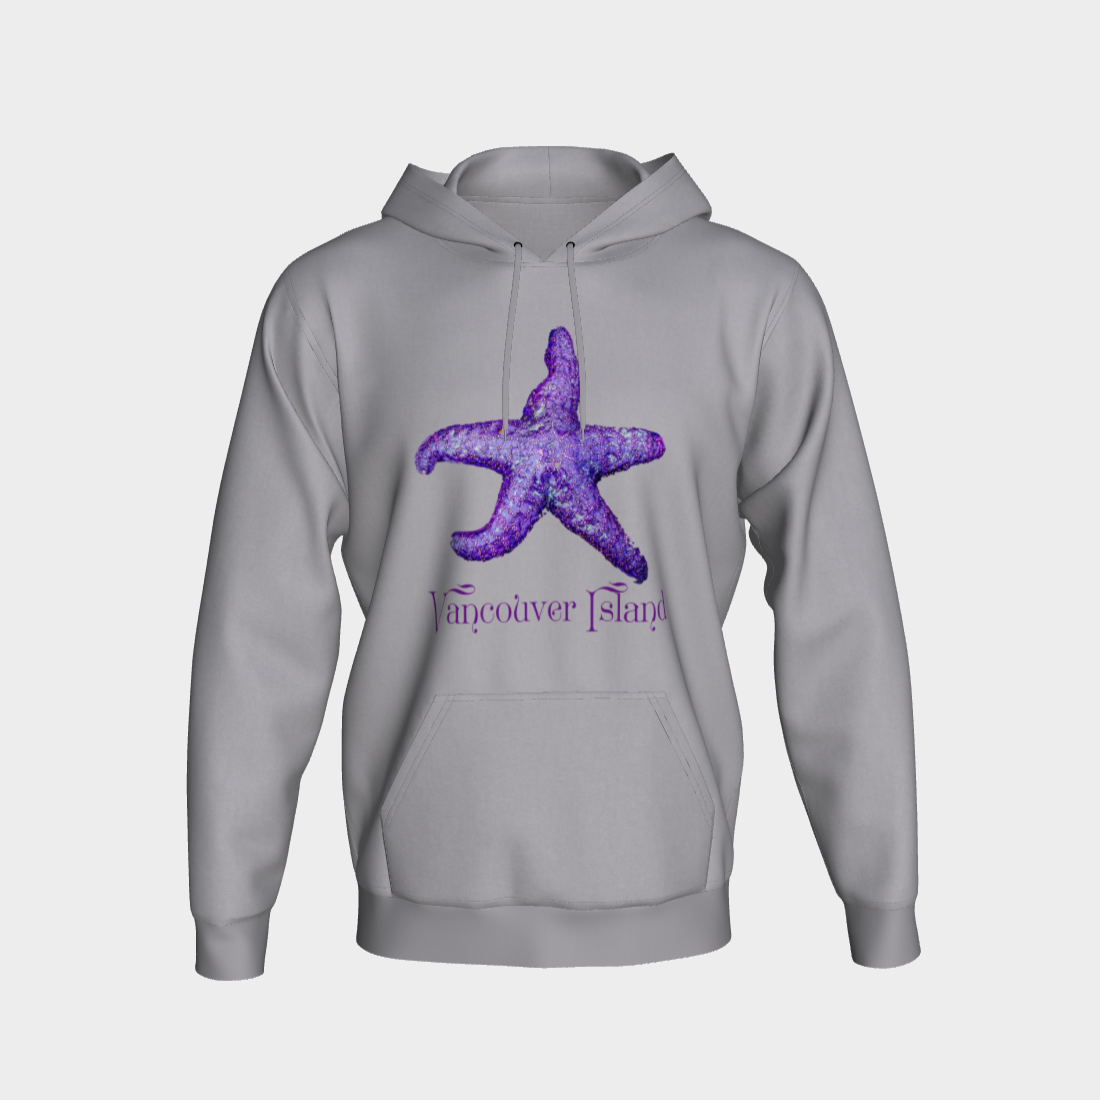 Starfish Vancouver Island Unisex Pullover Hoodie Your Van Isle Goddess unisex pullover hoodie is a great classic hoodie!  Created with state of the art tri-tex material which is a non-shrink poly middle encased in two layers of ultra soft cotton face and lining.  Features:  super cozy fluffy cotton lining double fleece lined hood kangaroo pocket flat drawcord non shrink fabric unisex fit designed to suit diverse body types